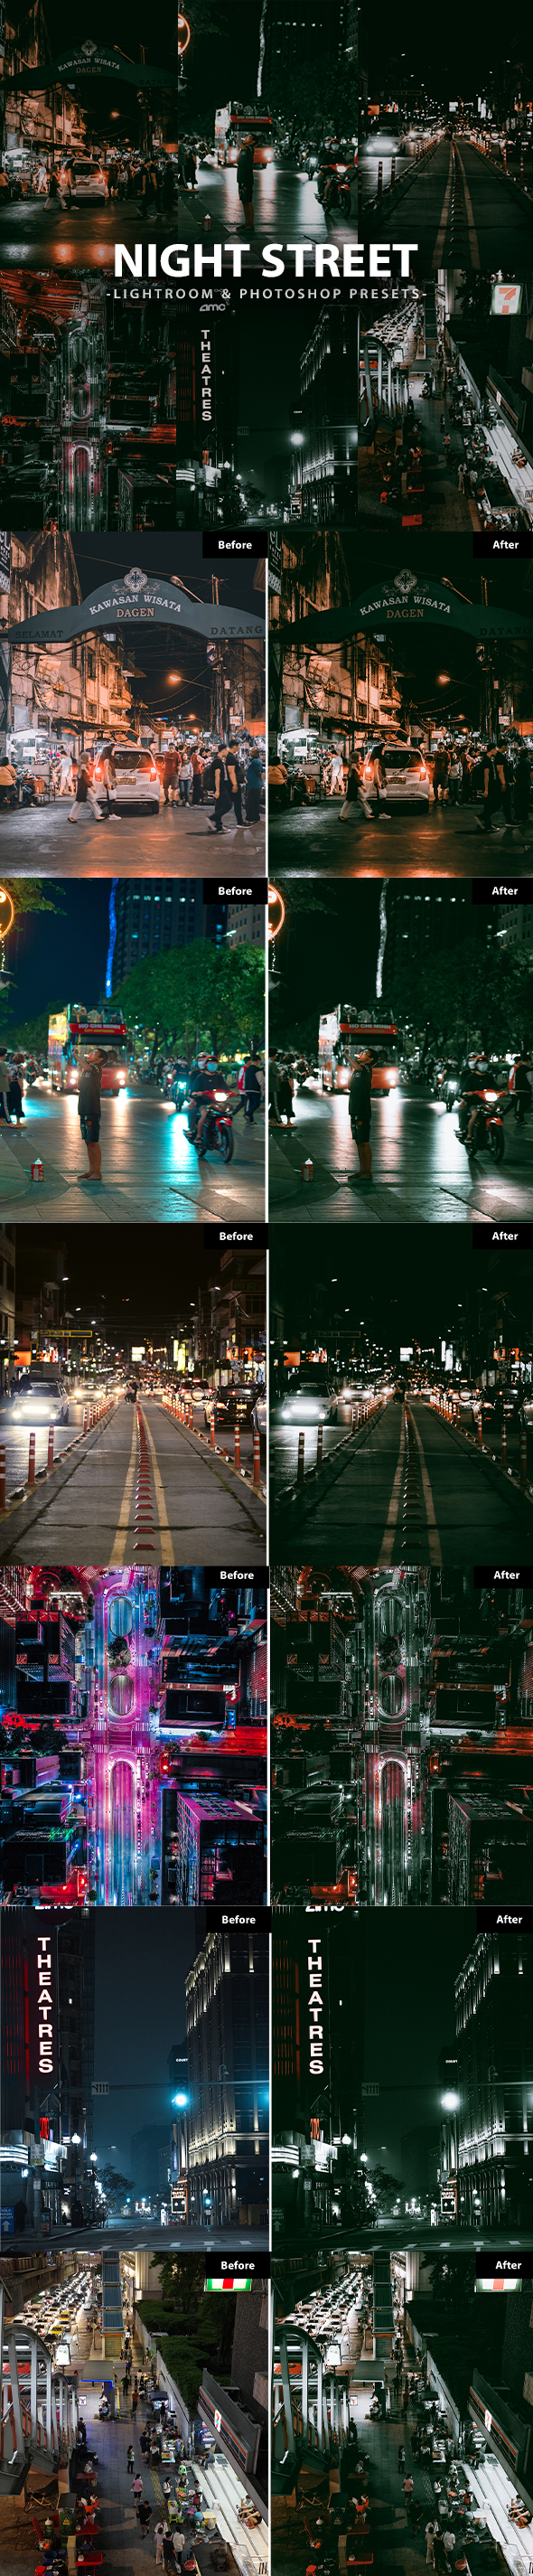 [DOWNLOAD]6 Night Stree Lightroom and Photoshp Presets